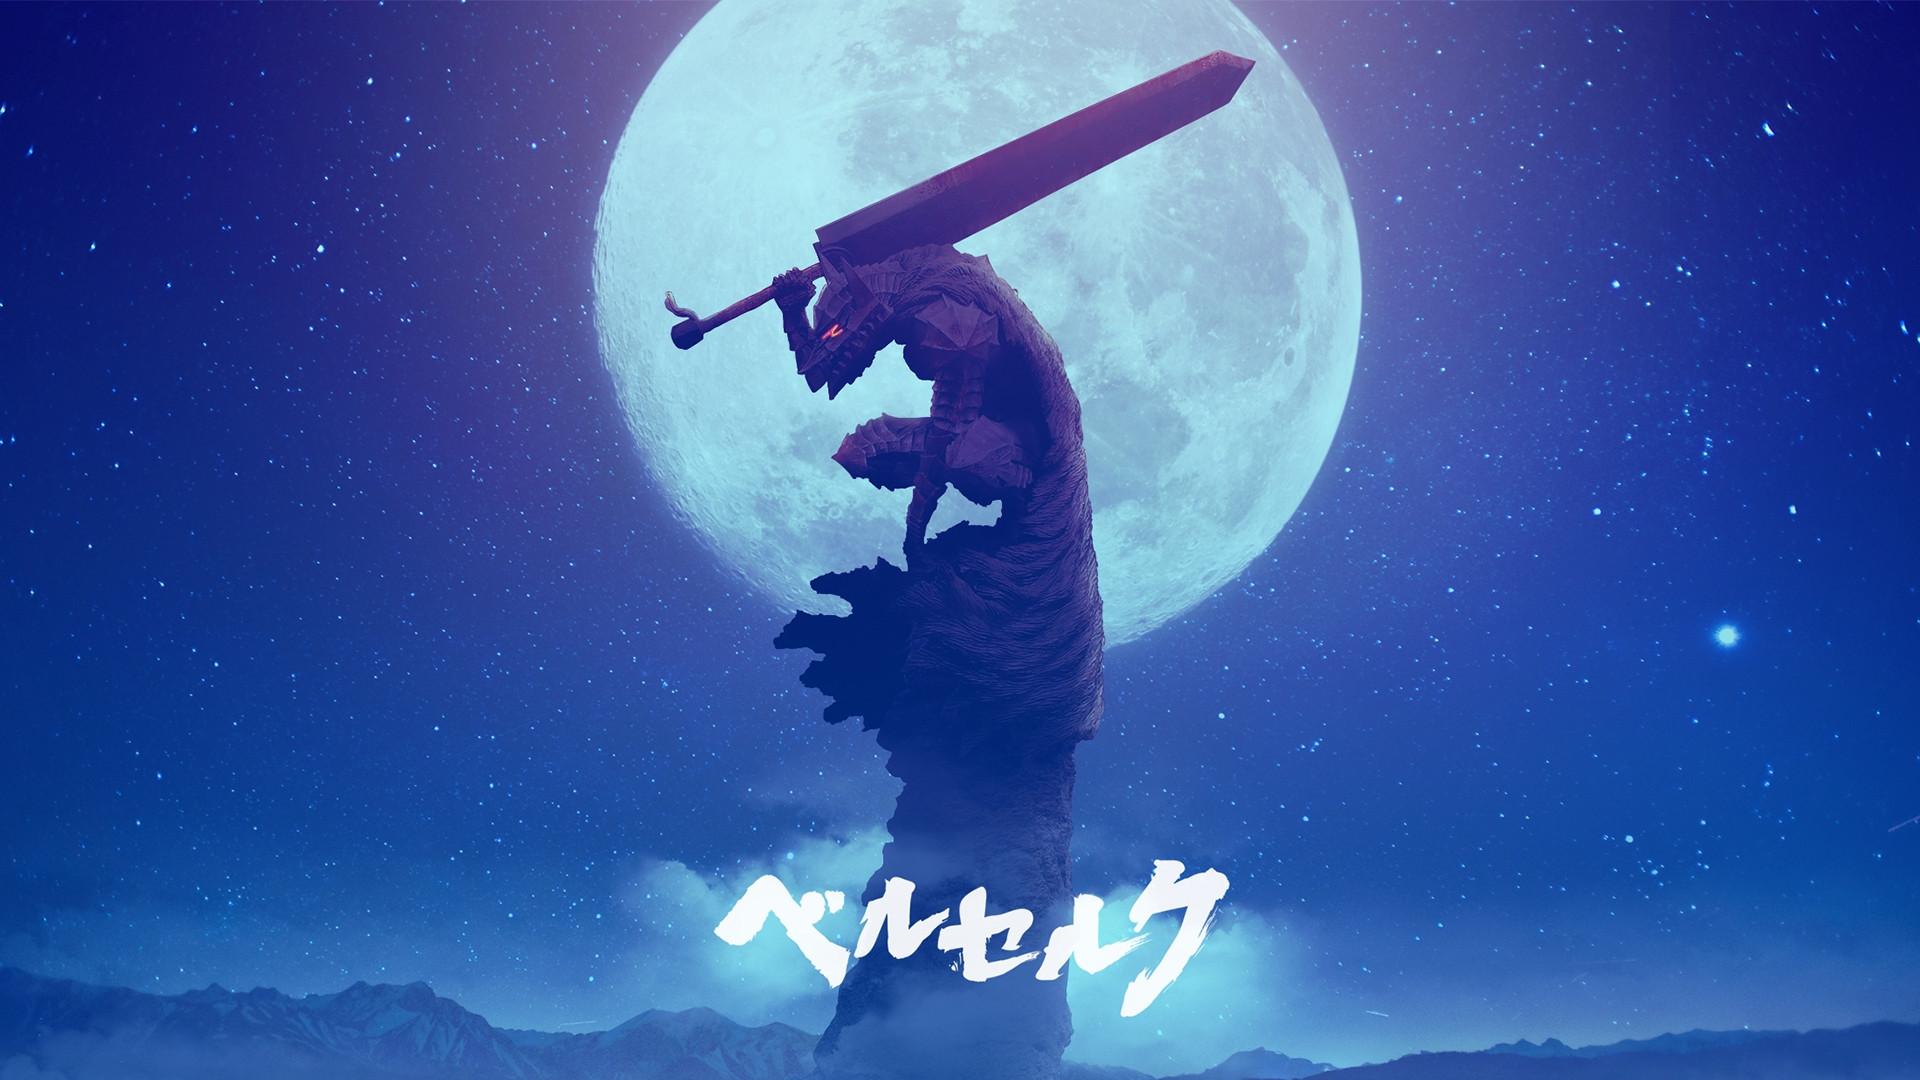 Collection of Anime Vaporwave Wallpaper (image in Collection)